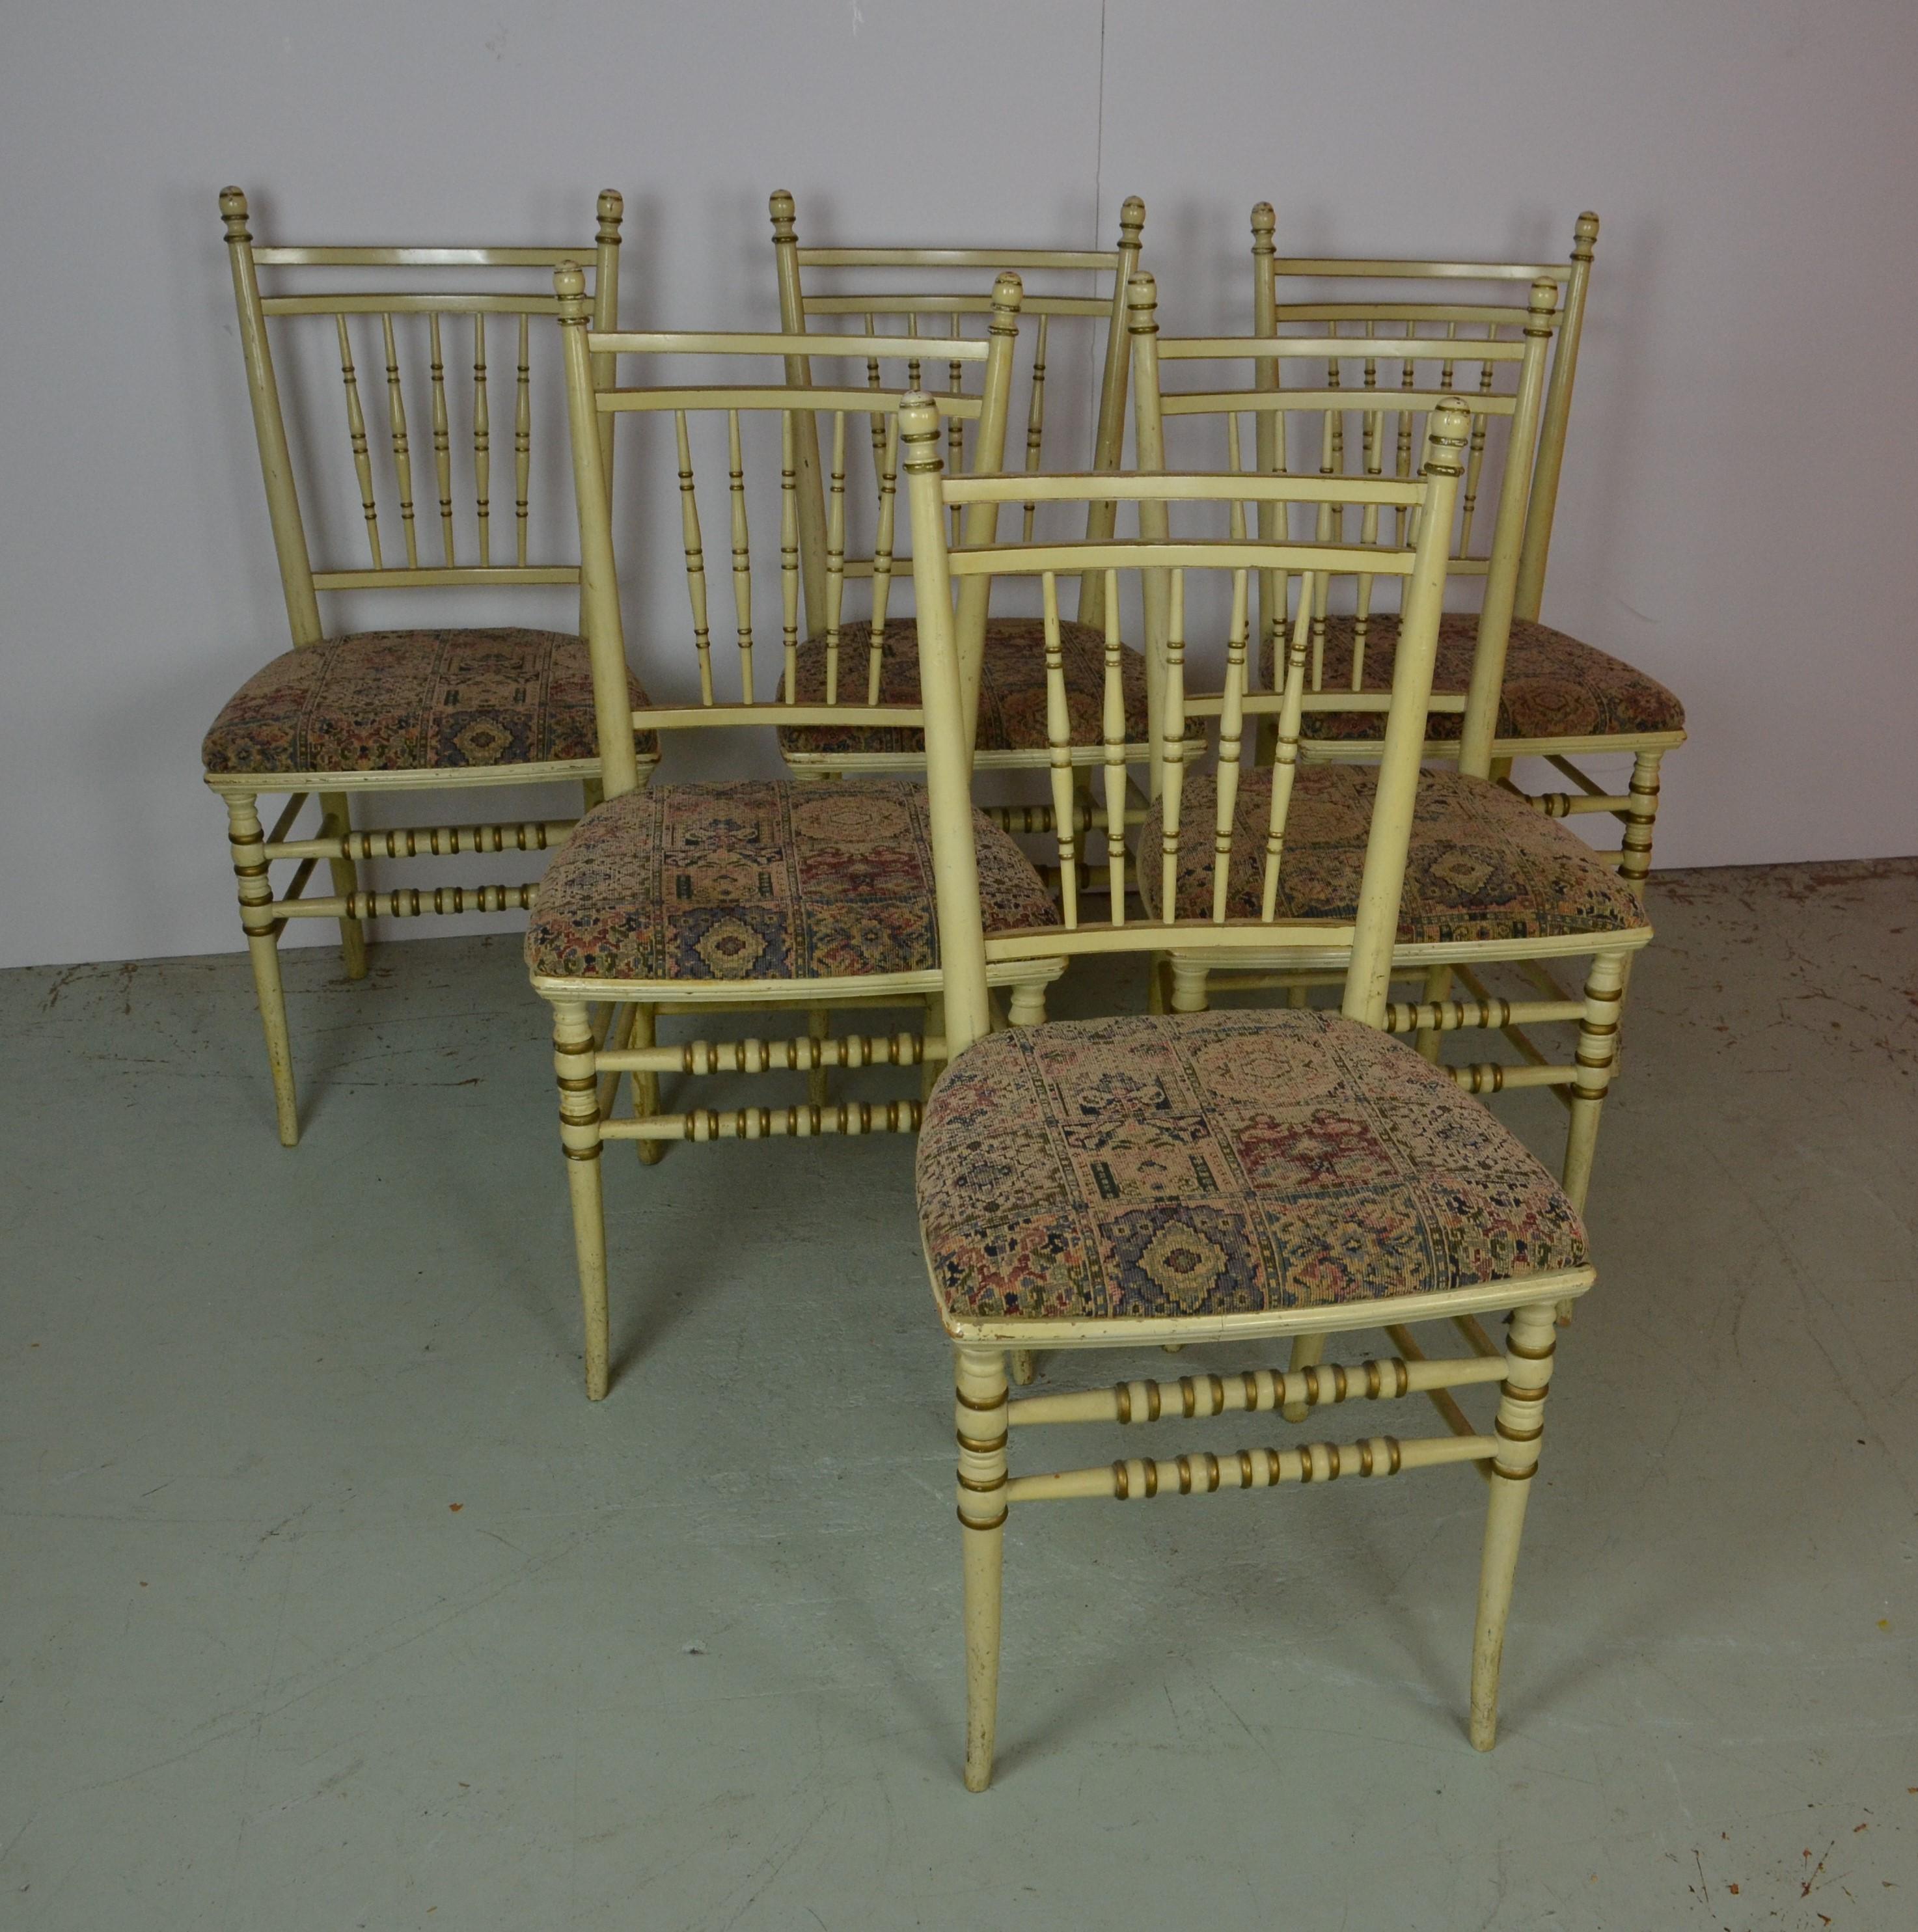 A set of 6 petite Spindle-back chairs finished in their original cream paint finish. Highlights in gold. Upholstered in a 